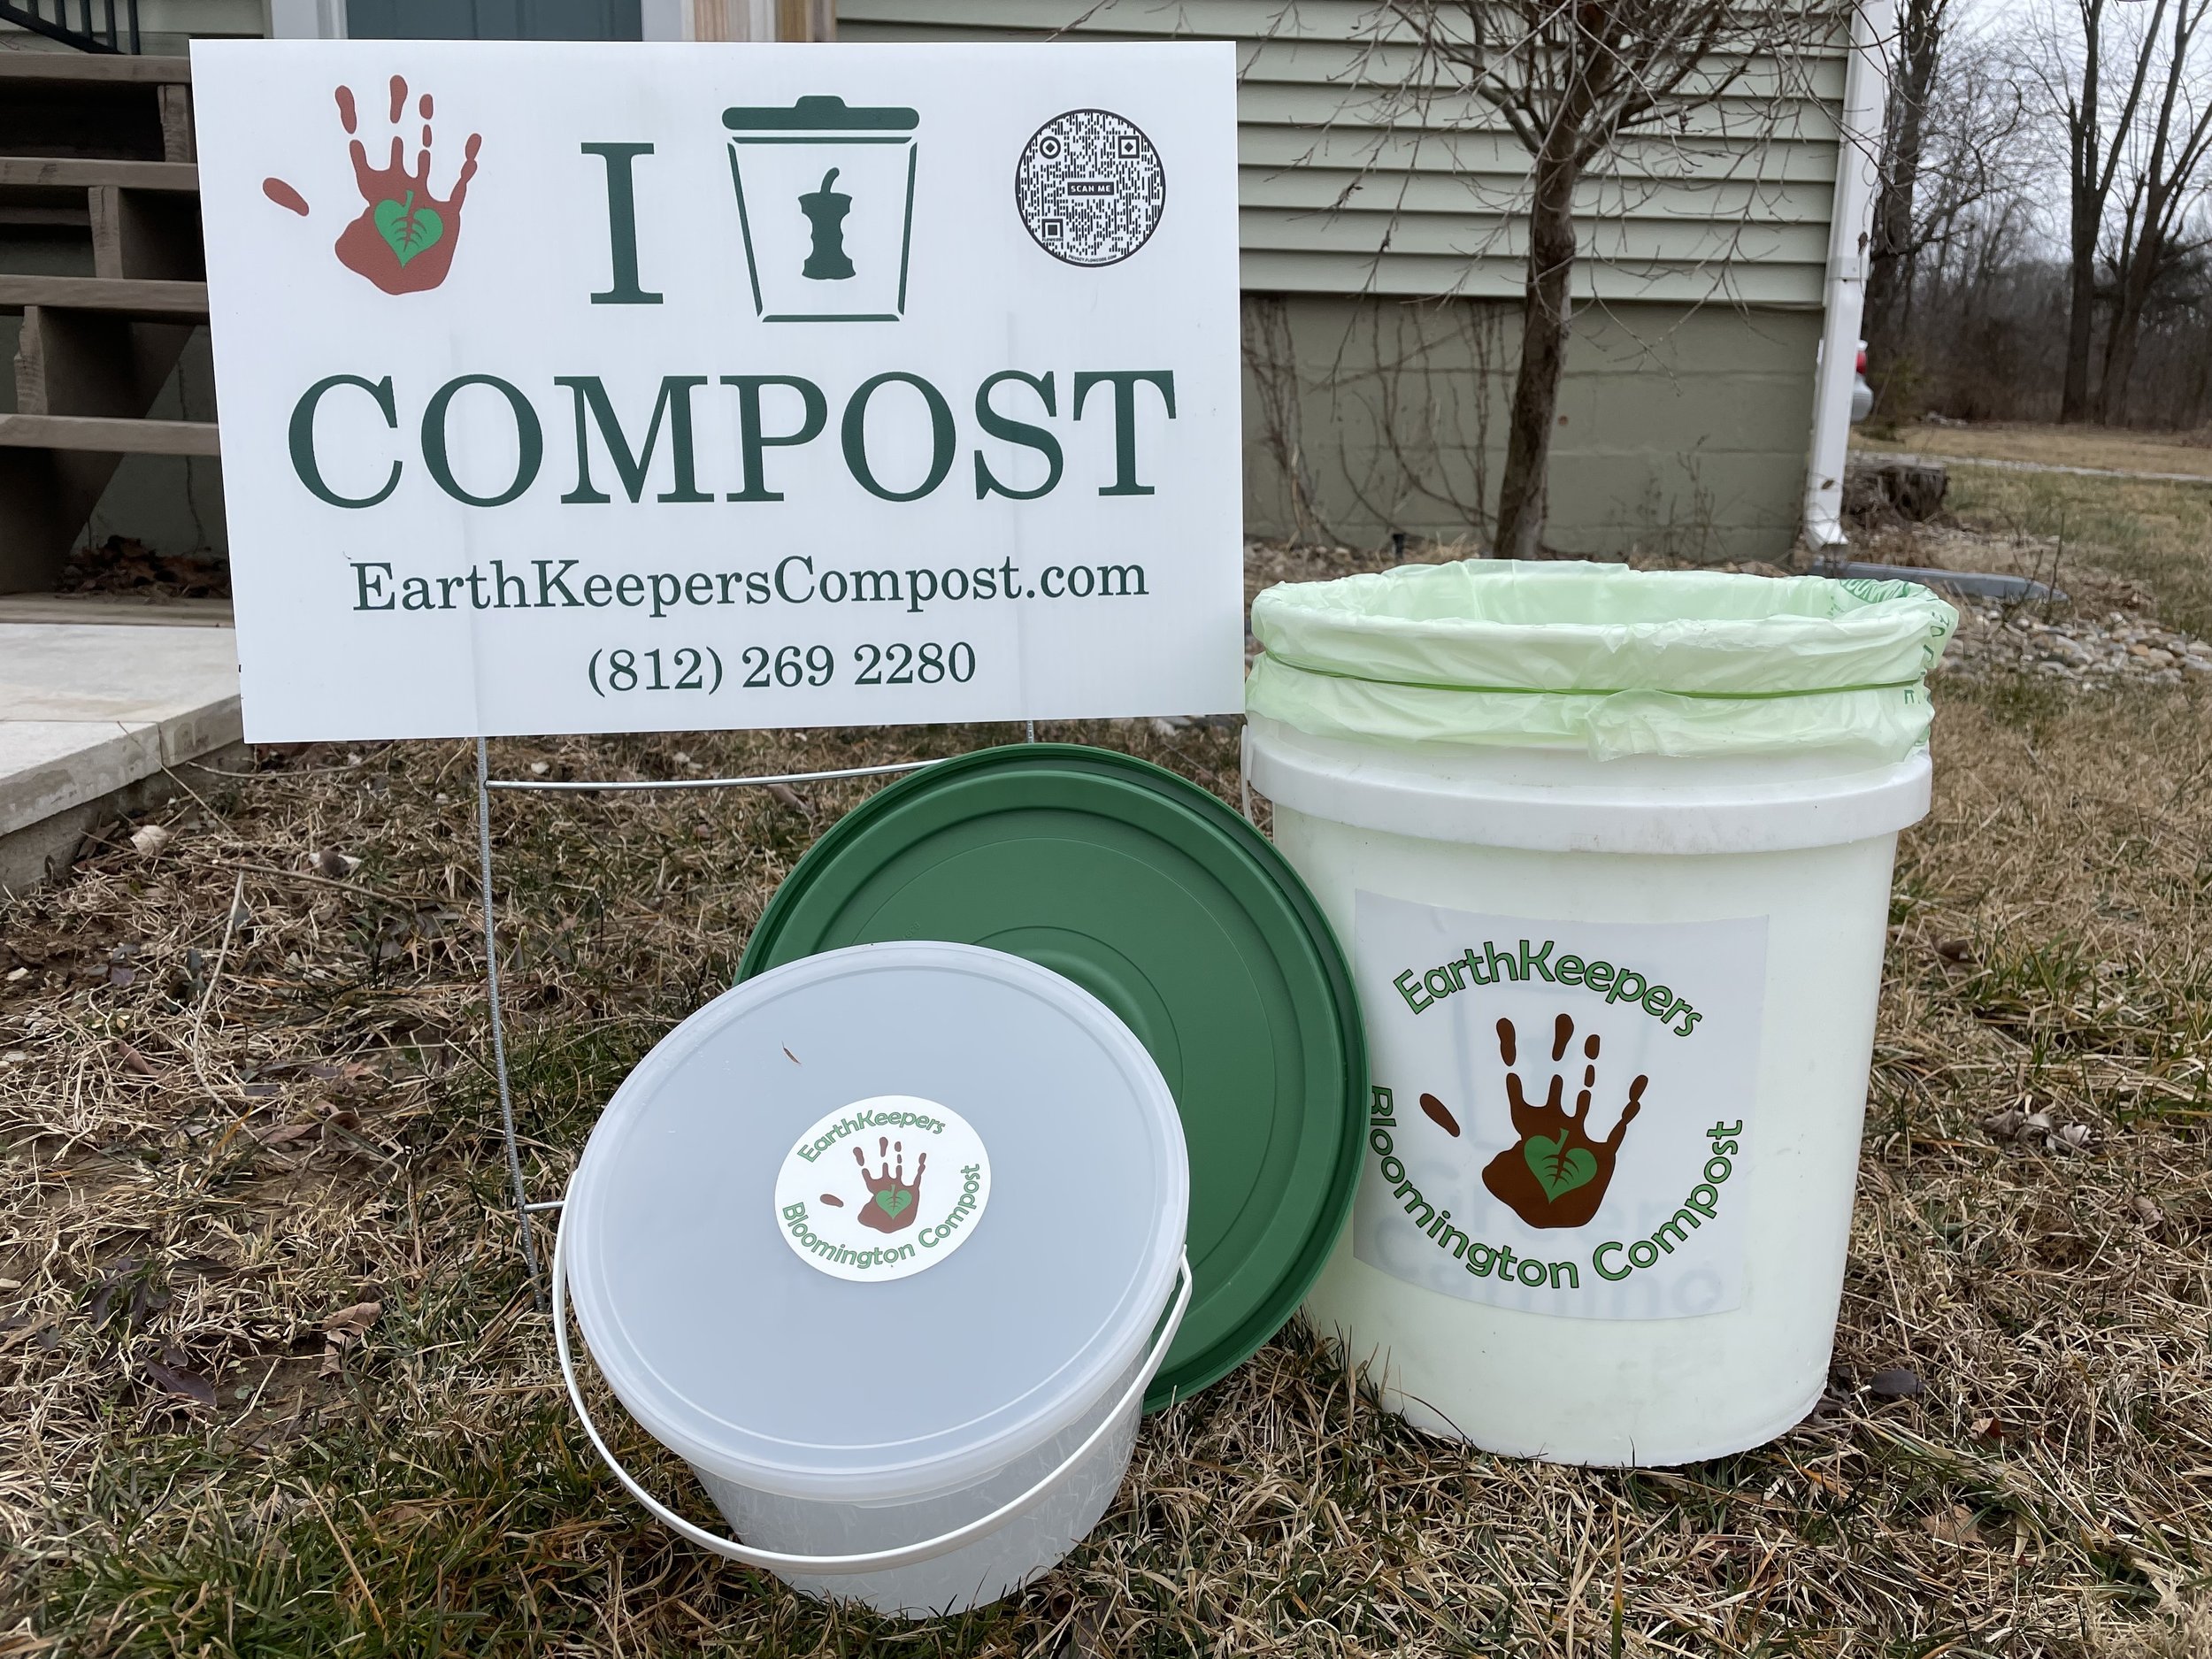 I Compost Yard Sign with EarthKeeper Buckets